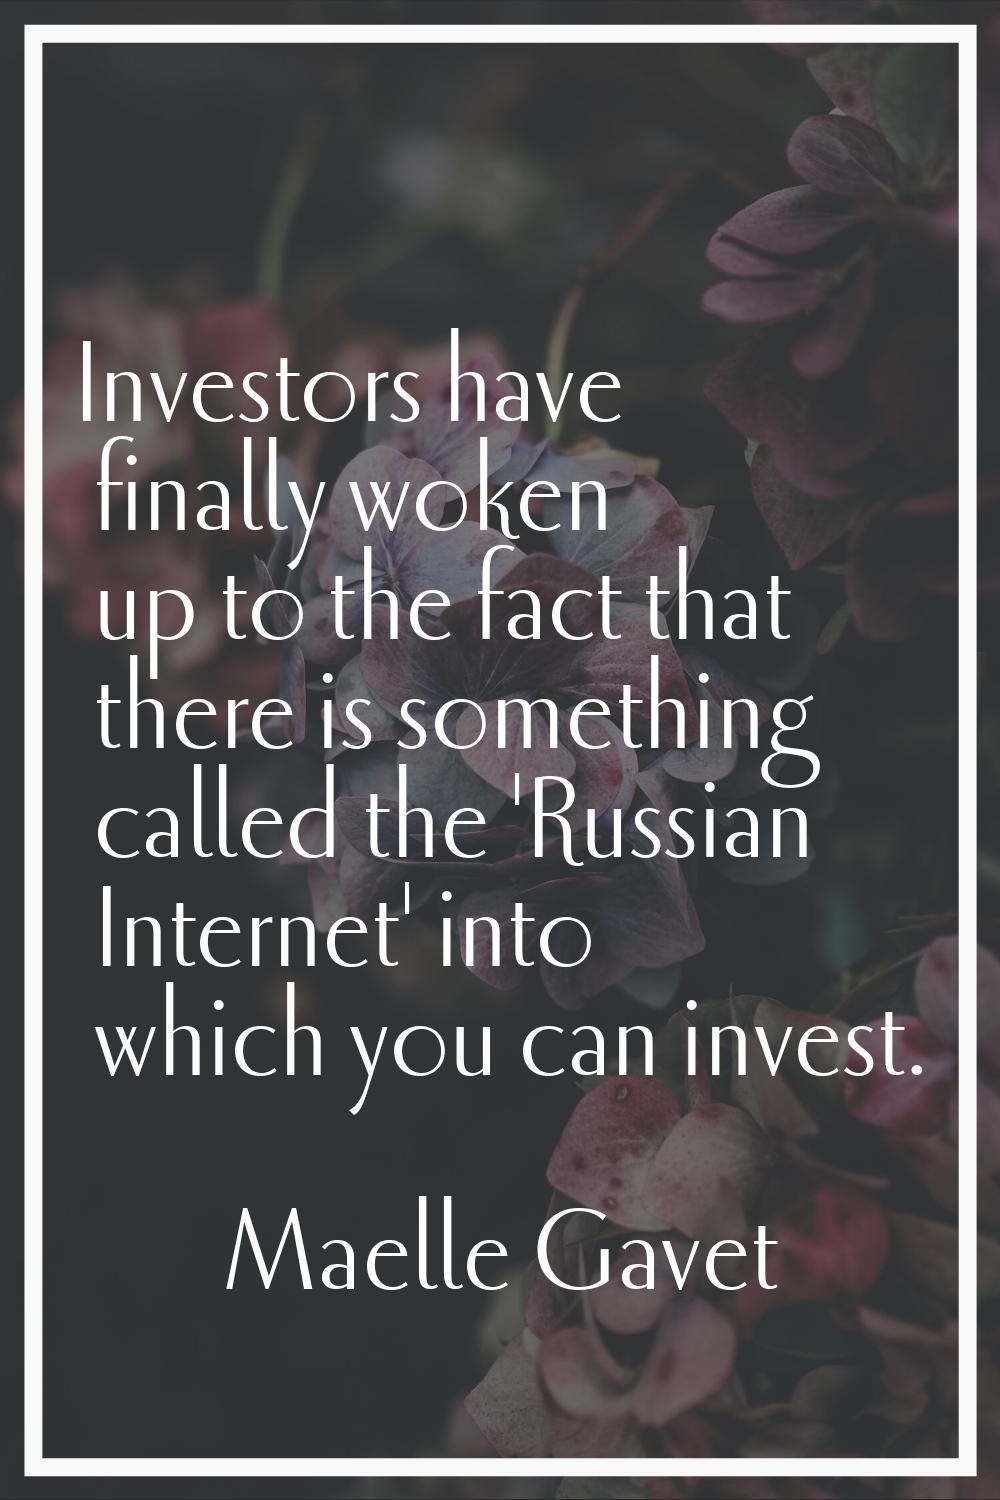 Investors have finally woken up to the fact that there is something called the 'Russian Internet' i